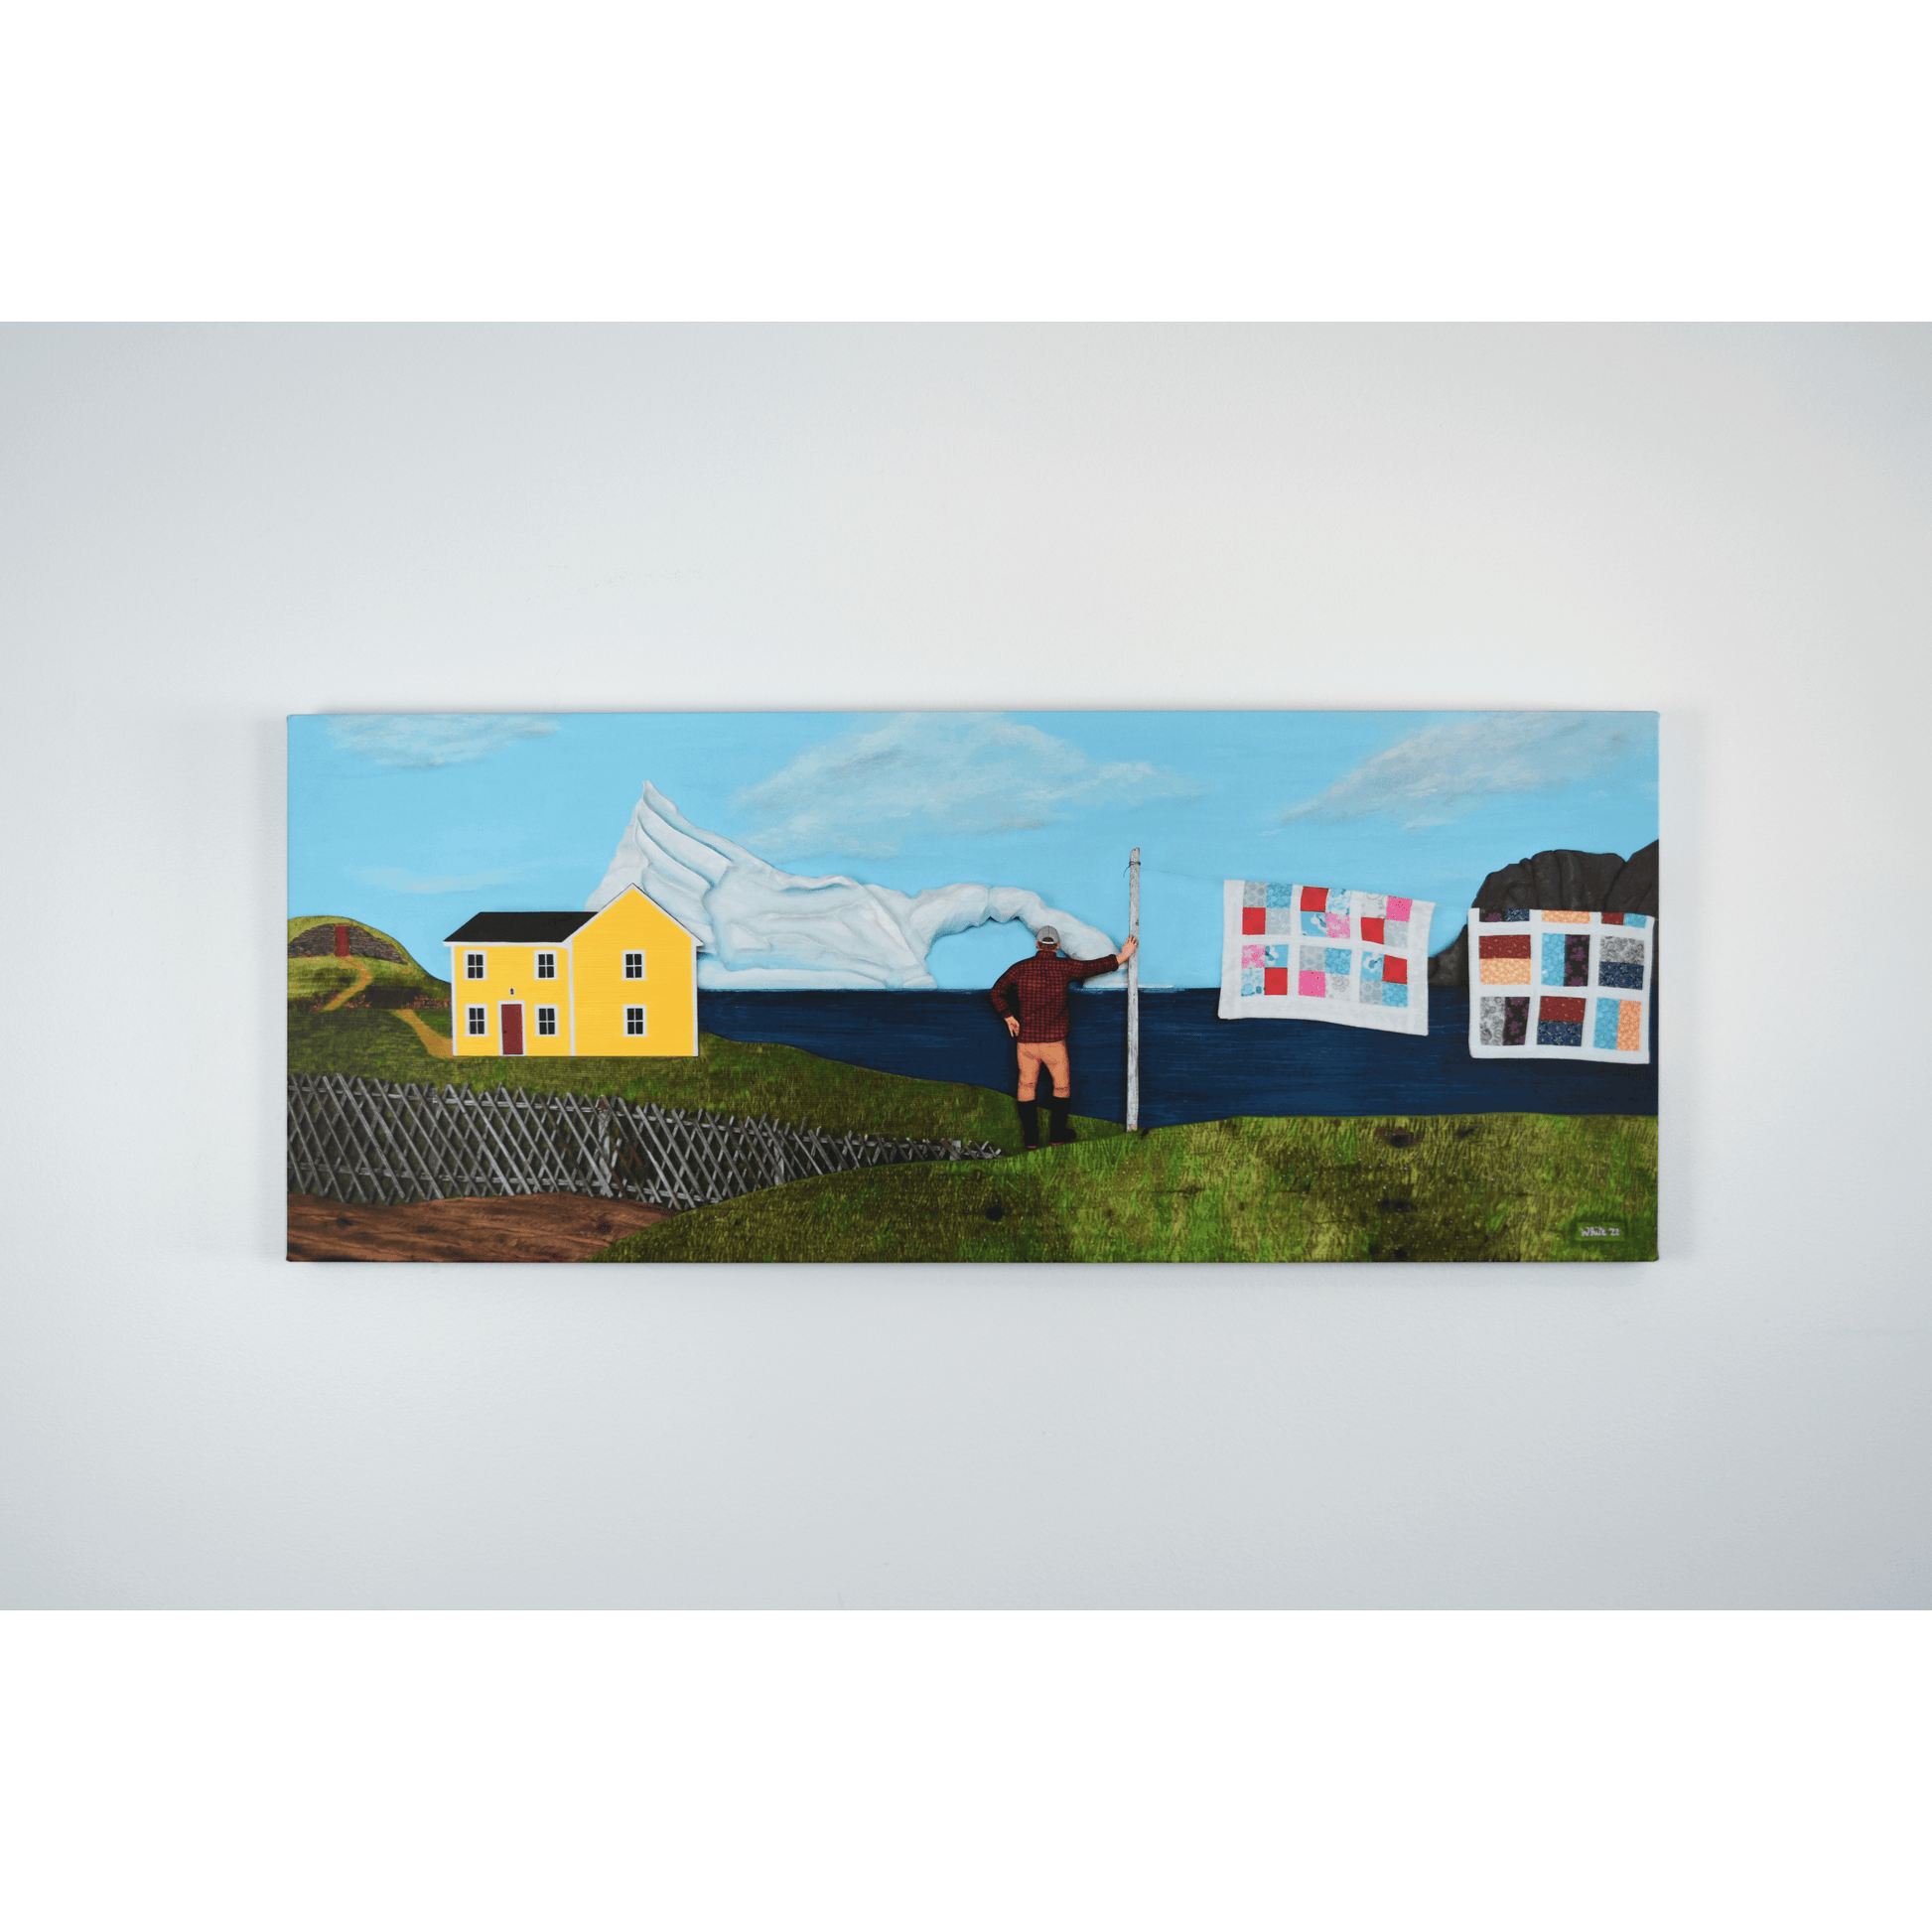 "Living Amongst Giants" canvas captures a classic Twillingate scene with a man watching an iceberg pass the shores of Newfoundland.